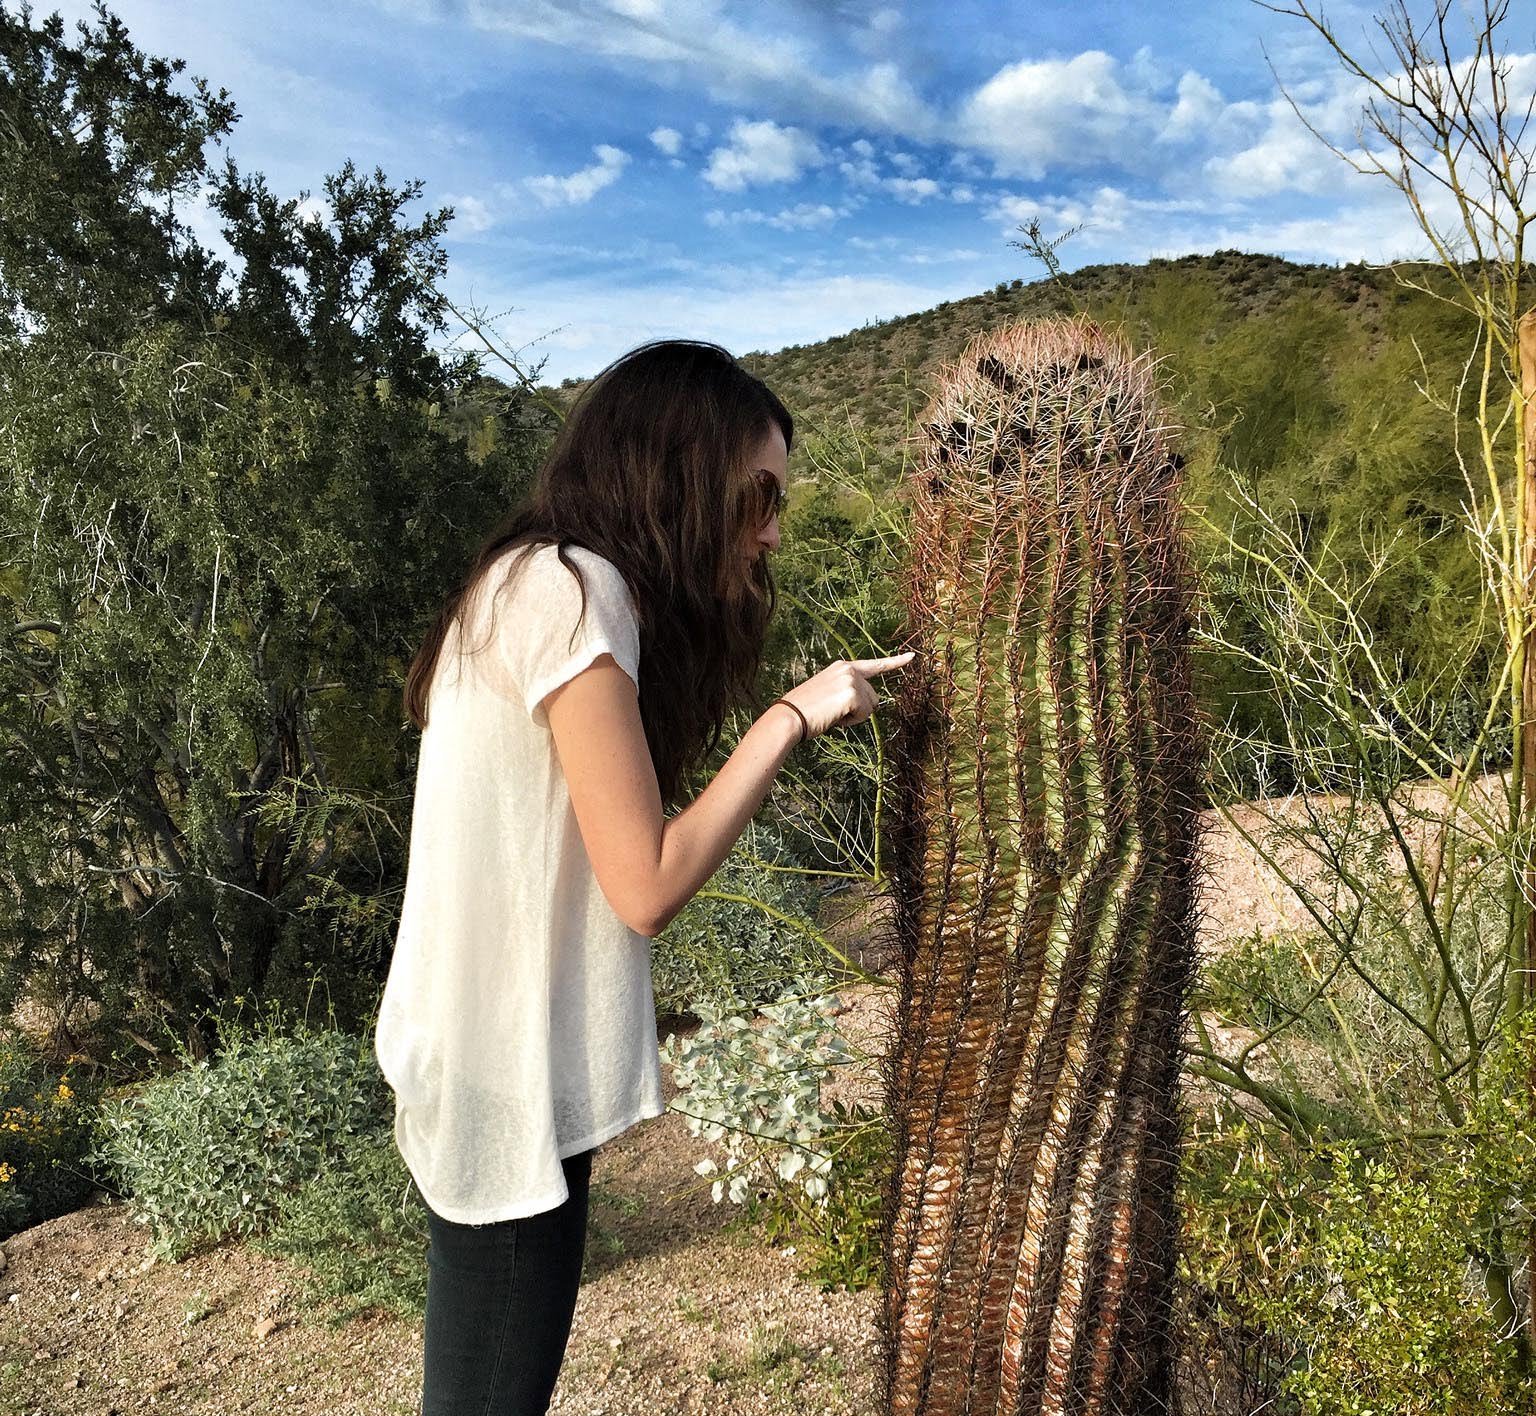 Touch cactus